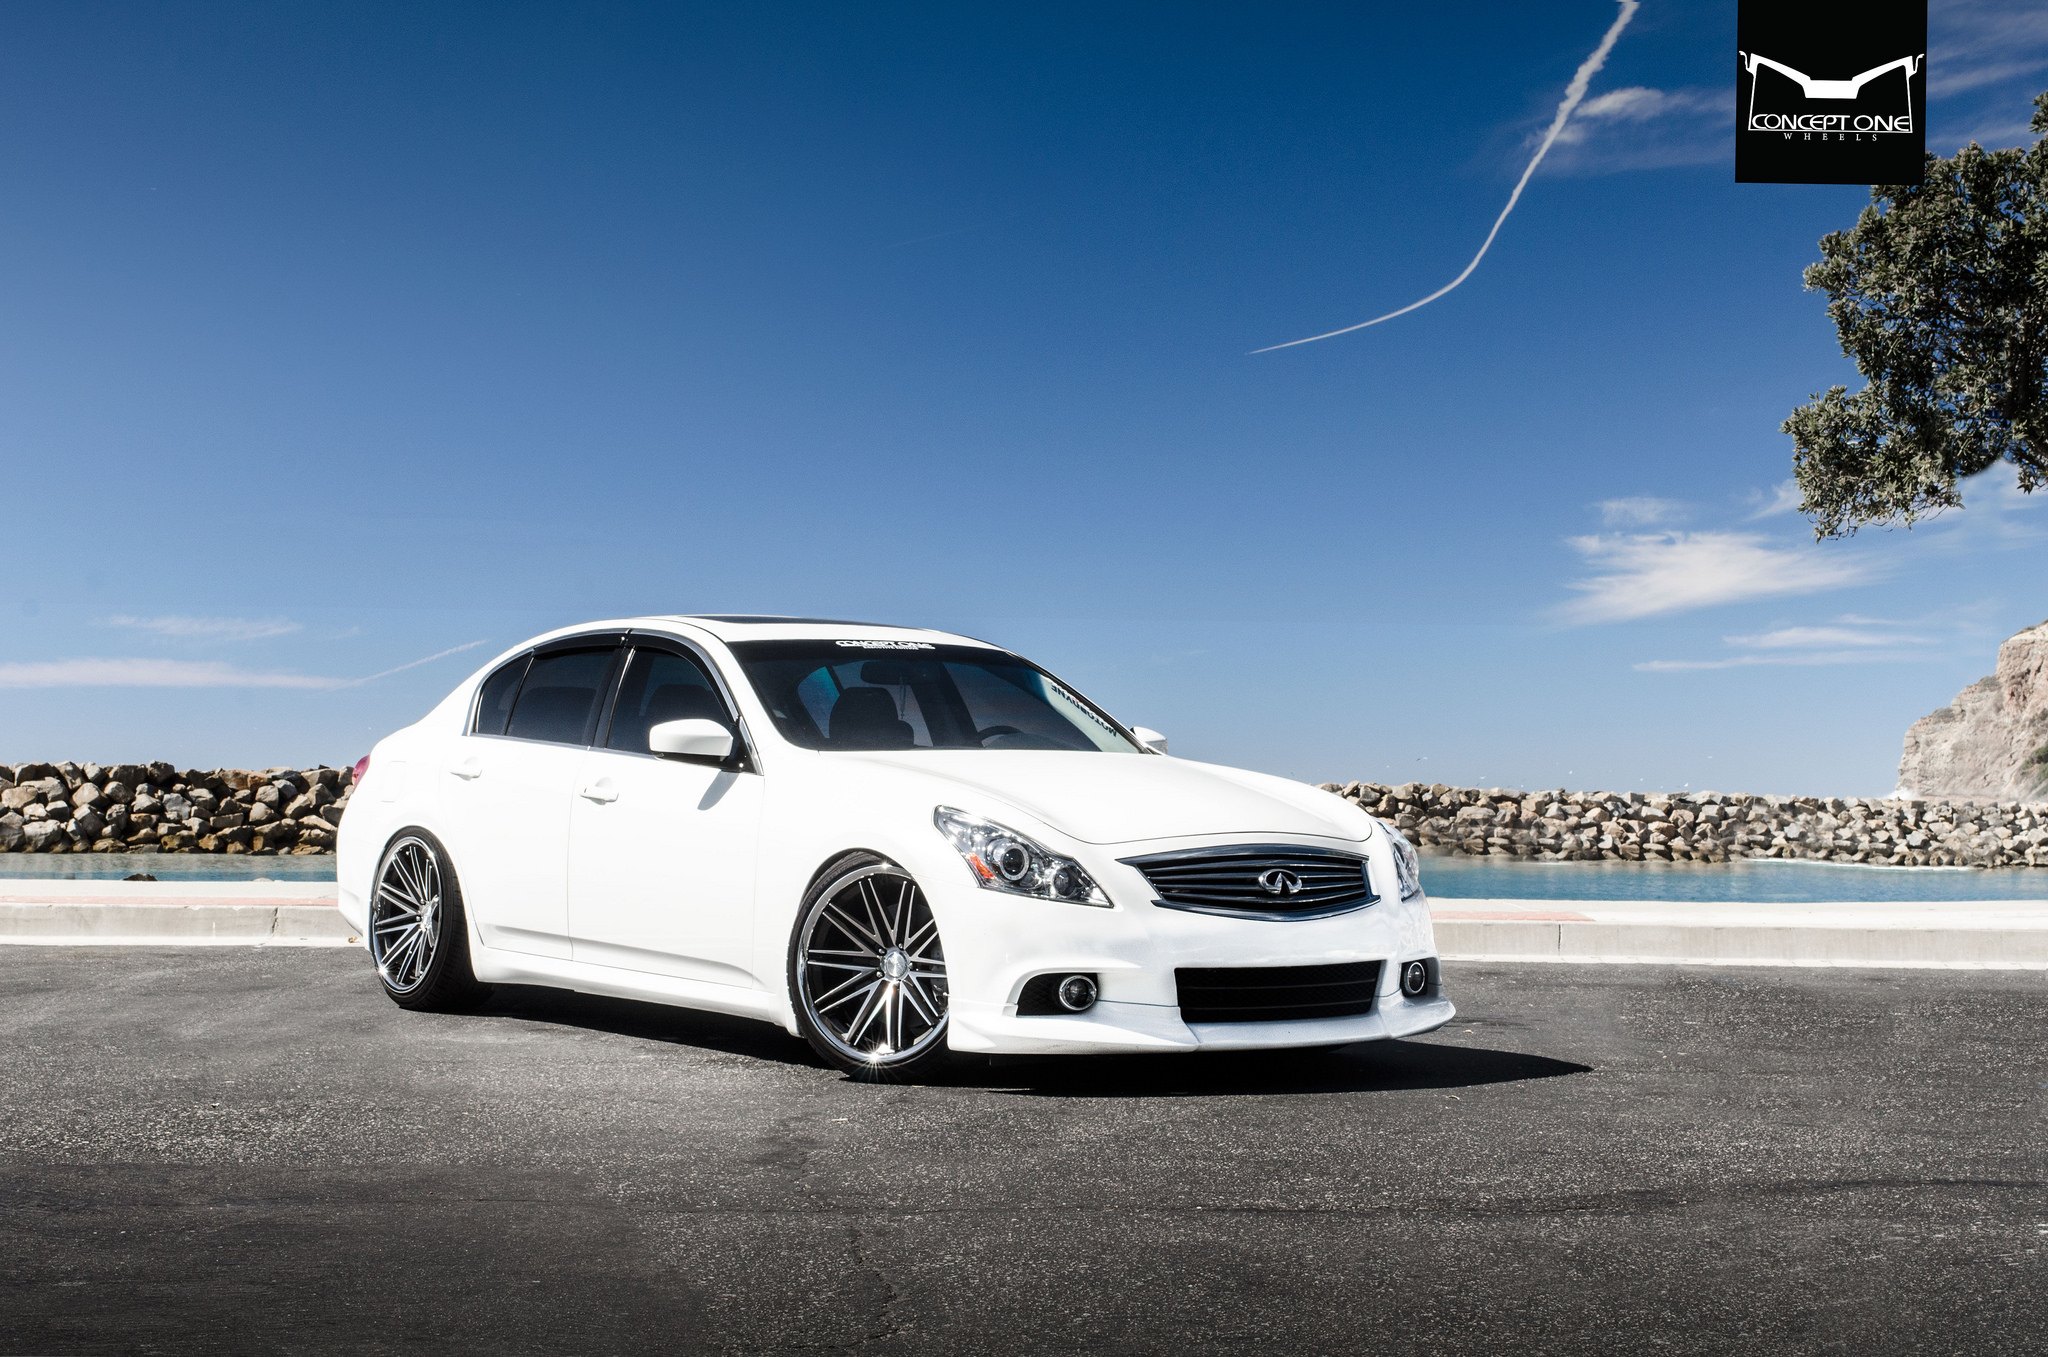 White Infiniti G37 with Aftermarket Projector Headlights - Photo by Concept One